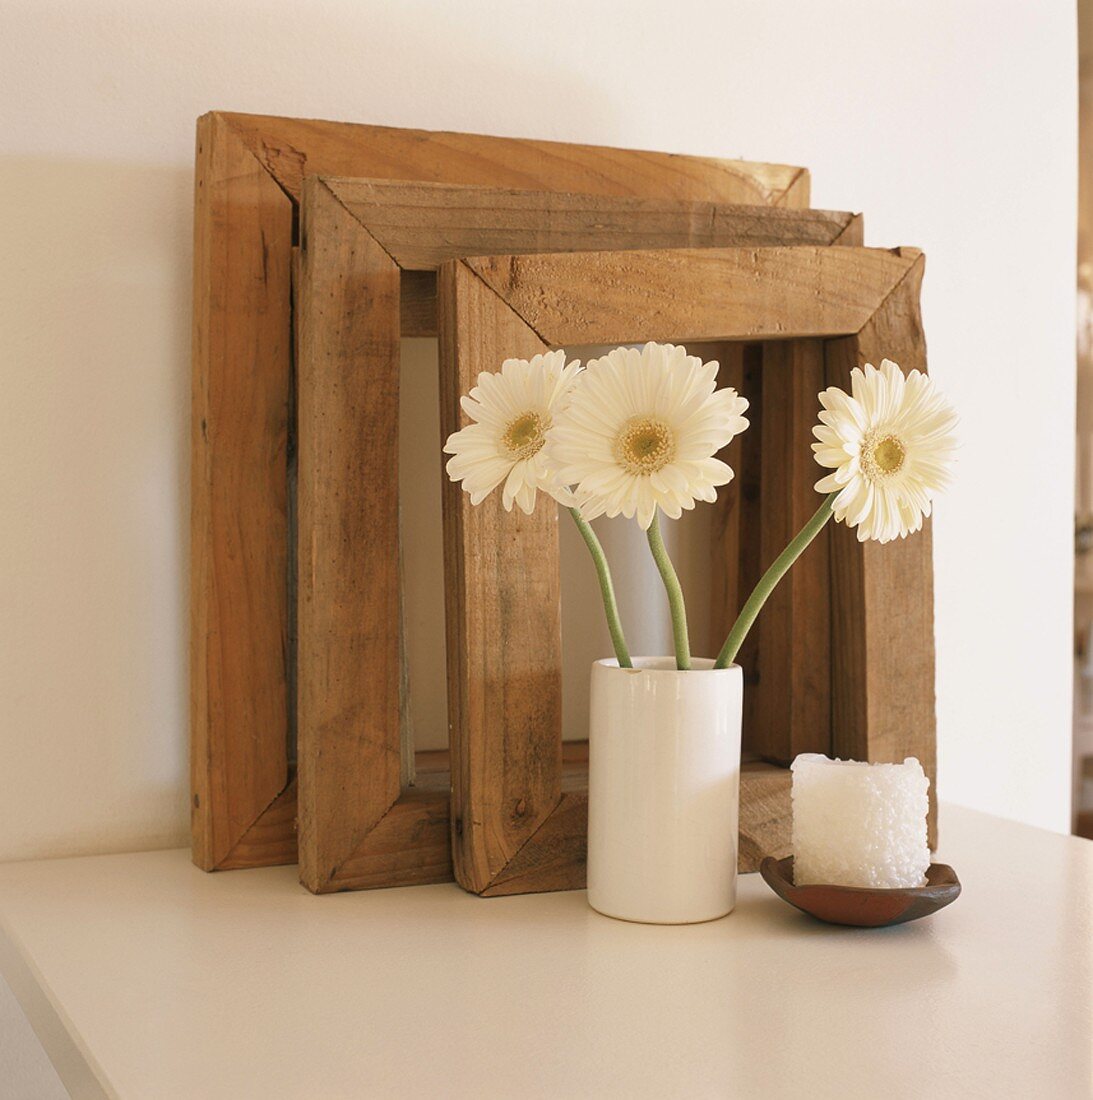 Three wooden picture frames and vase of gerbera daisies